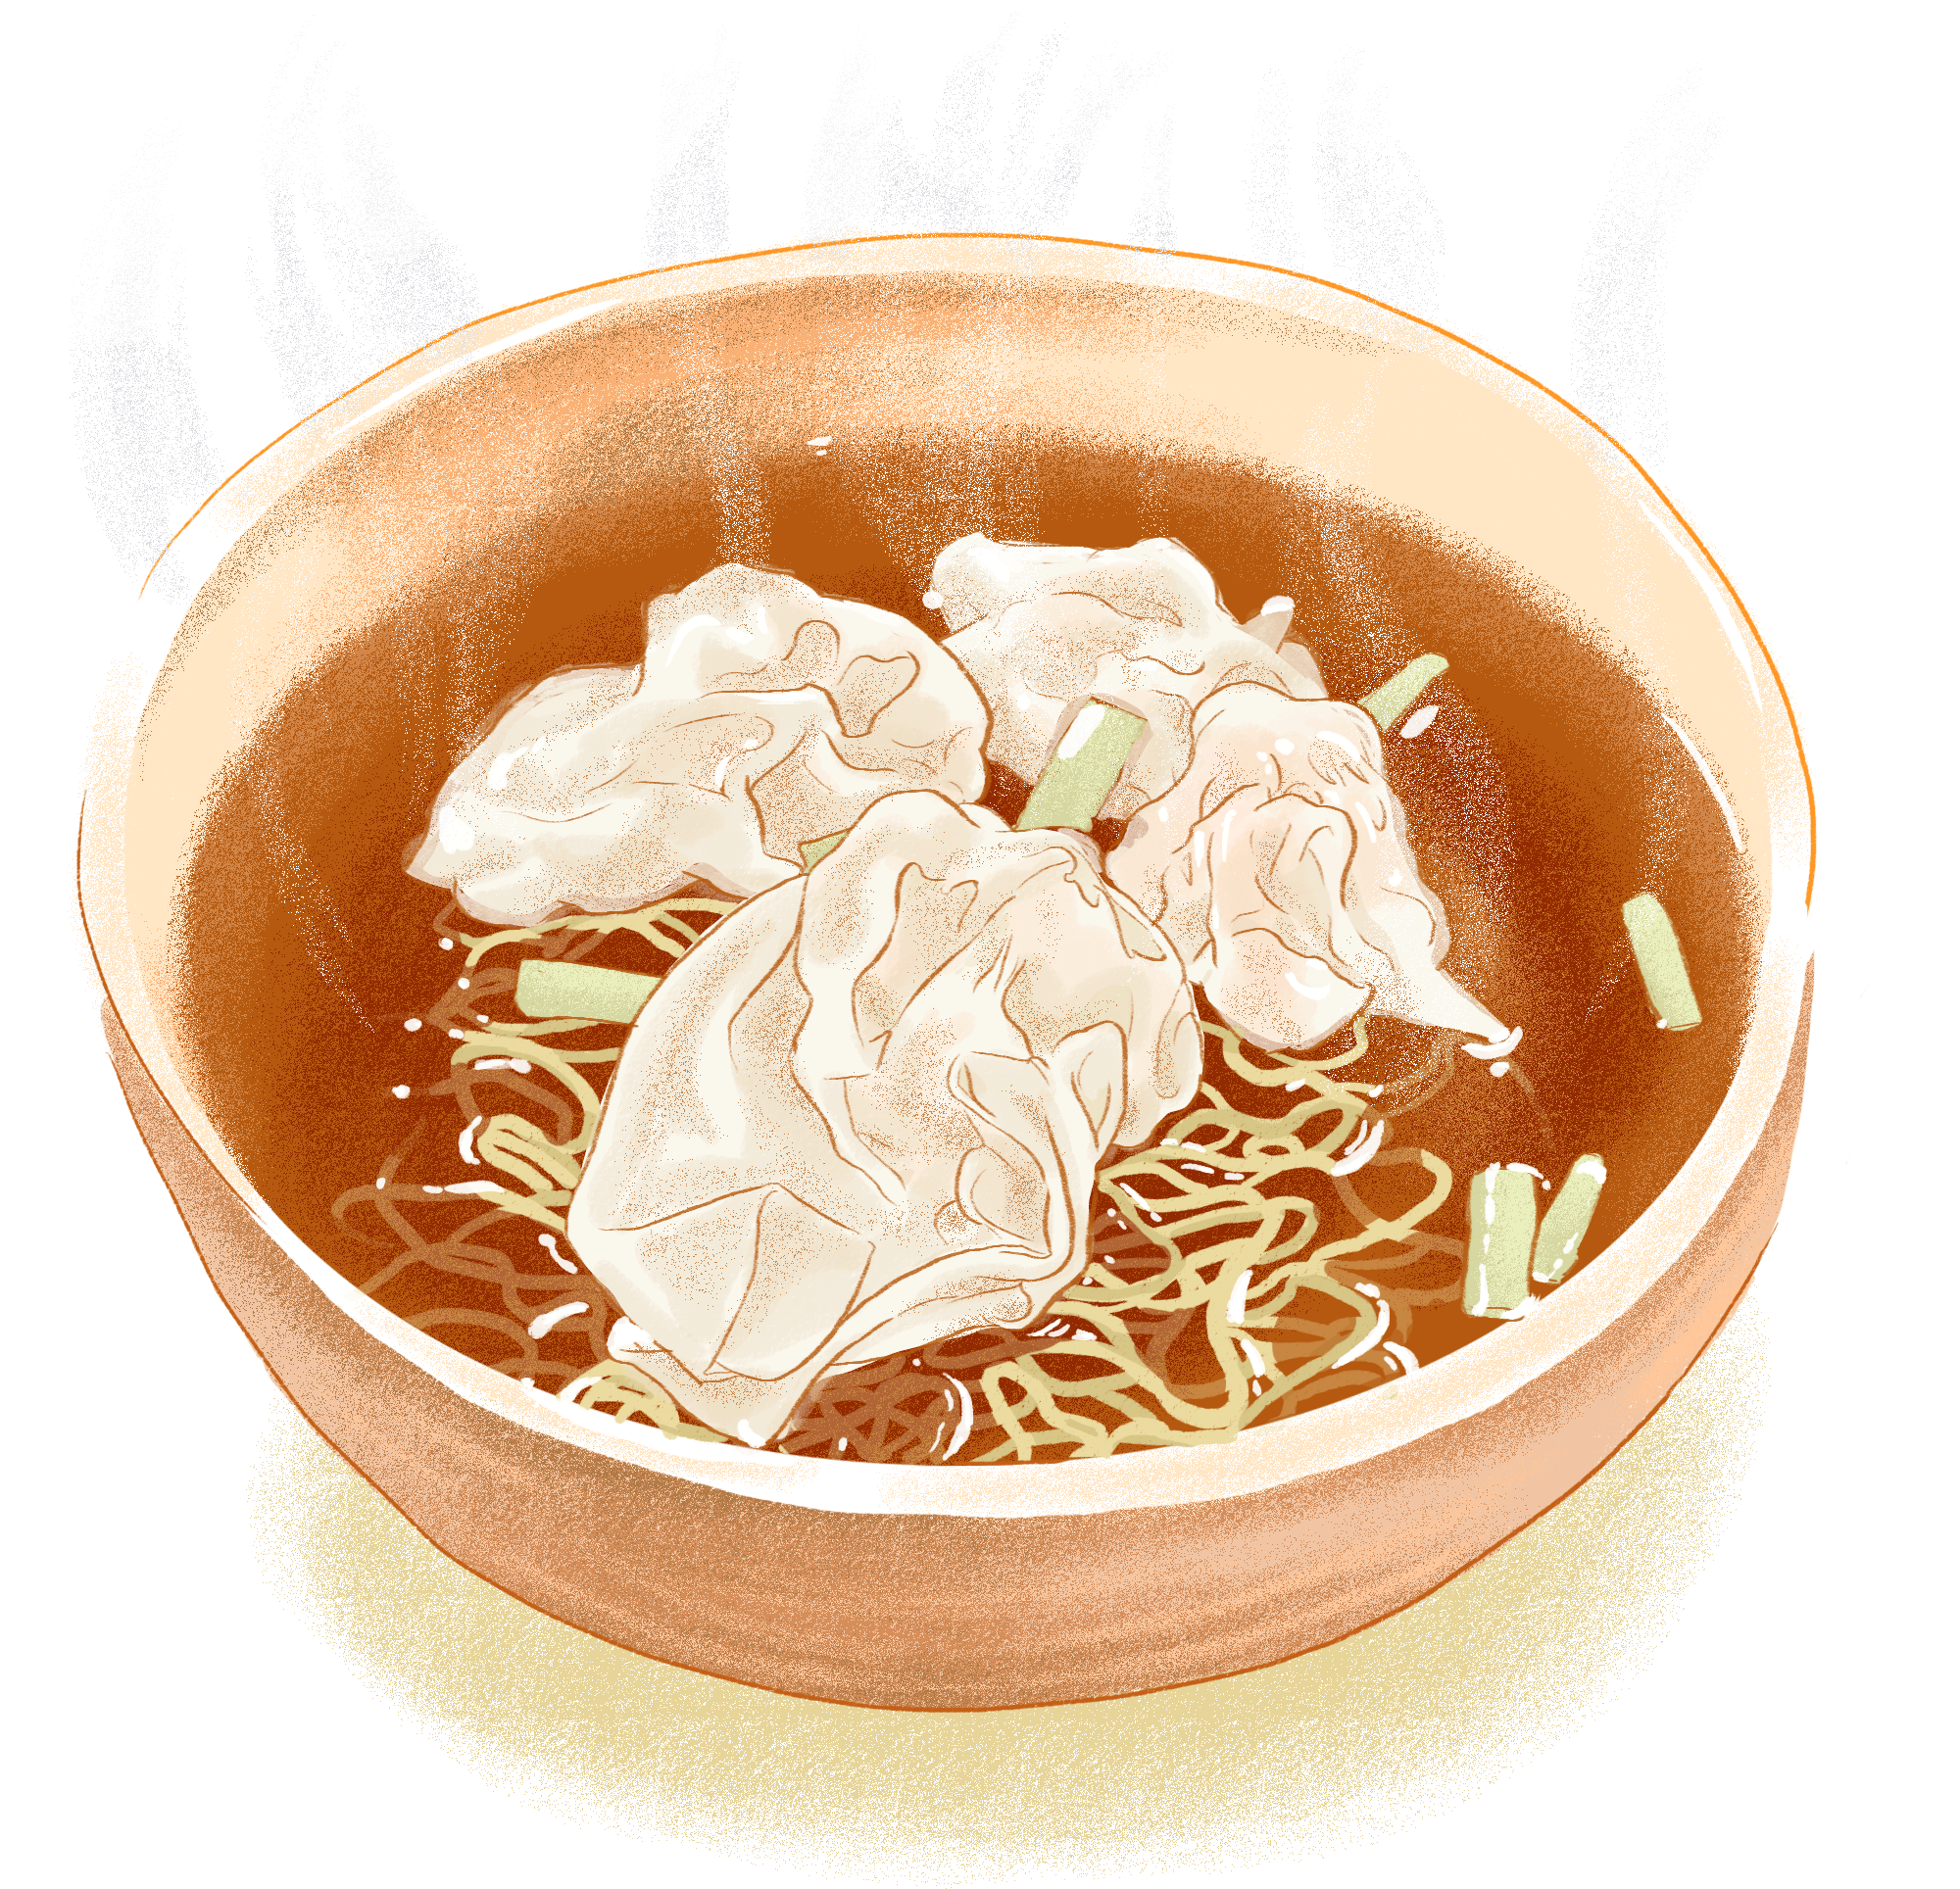 A bowl of wonton noodles with soup fuming